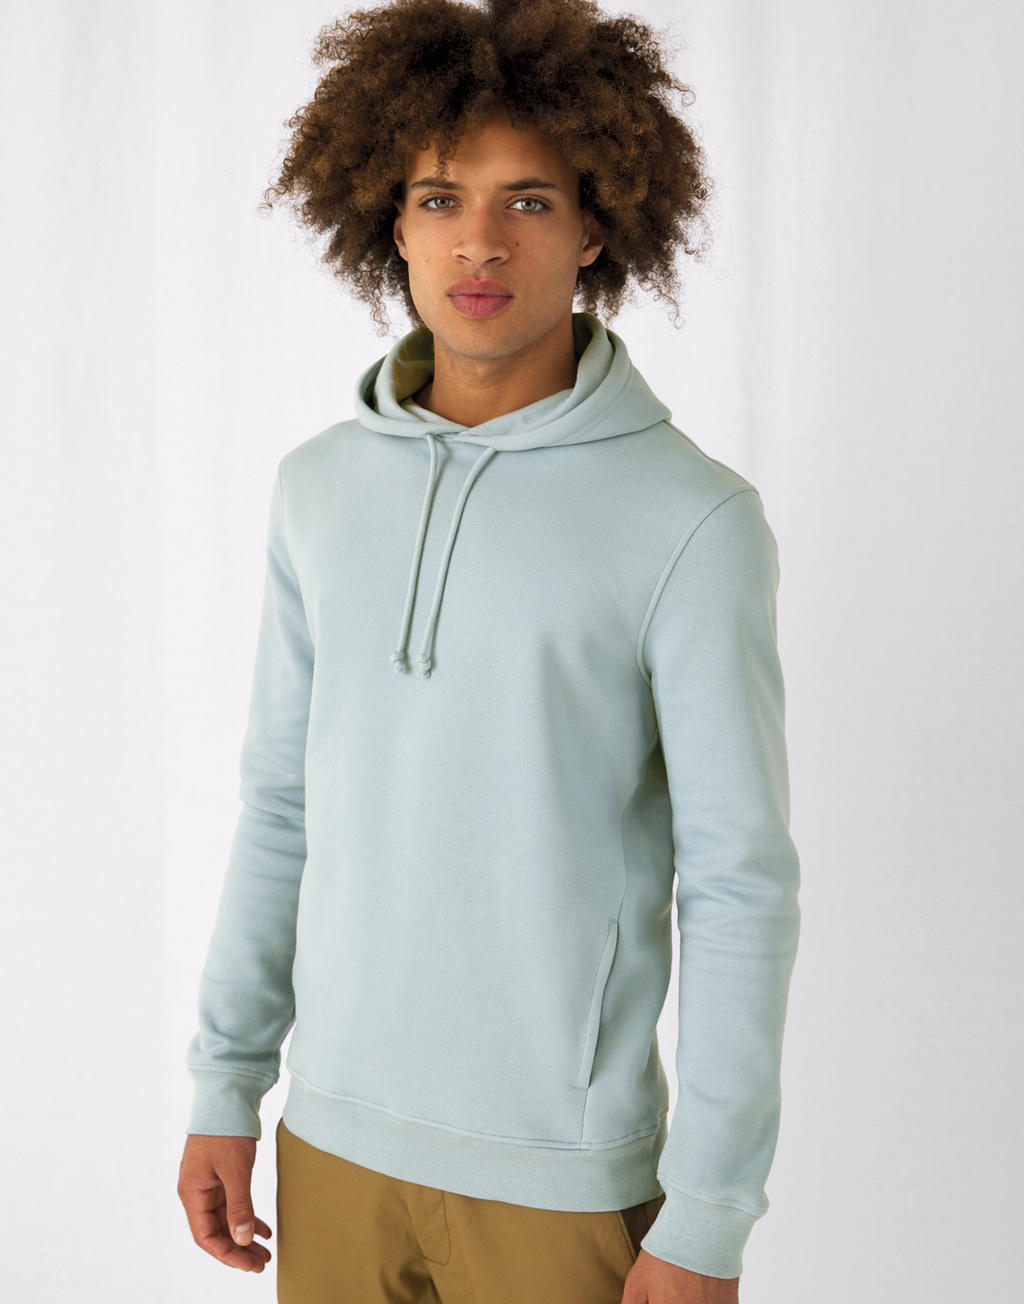 Unisex organic cotton and recycled polyester hoodie - Barton